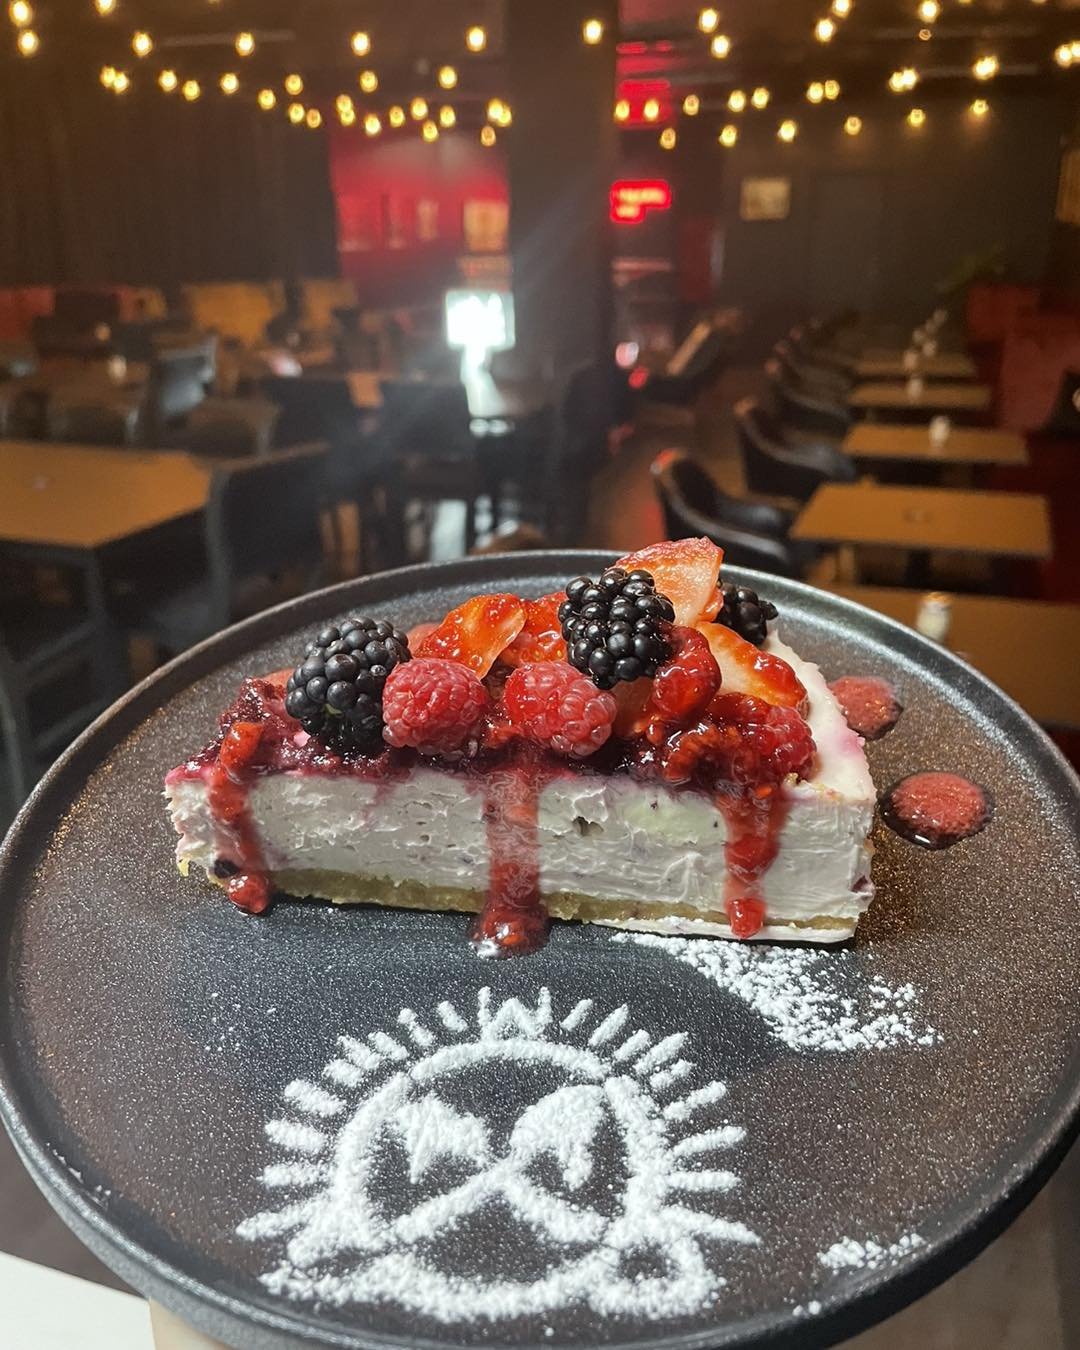 Gluten free mixed berry cheesecake... yes please!

Cake cult
101 little Malop st, Geelong
6pm til 11pm